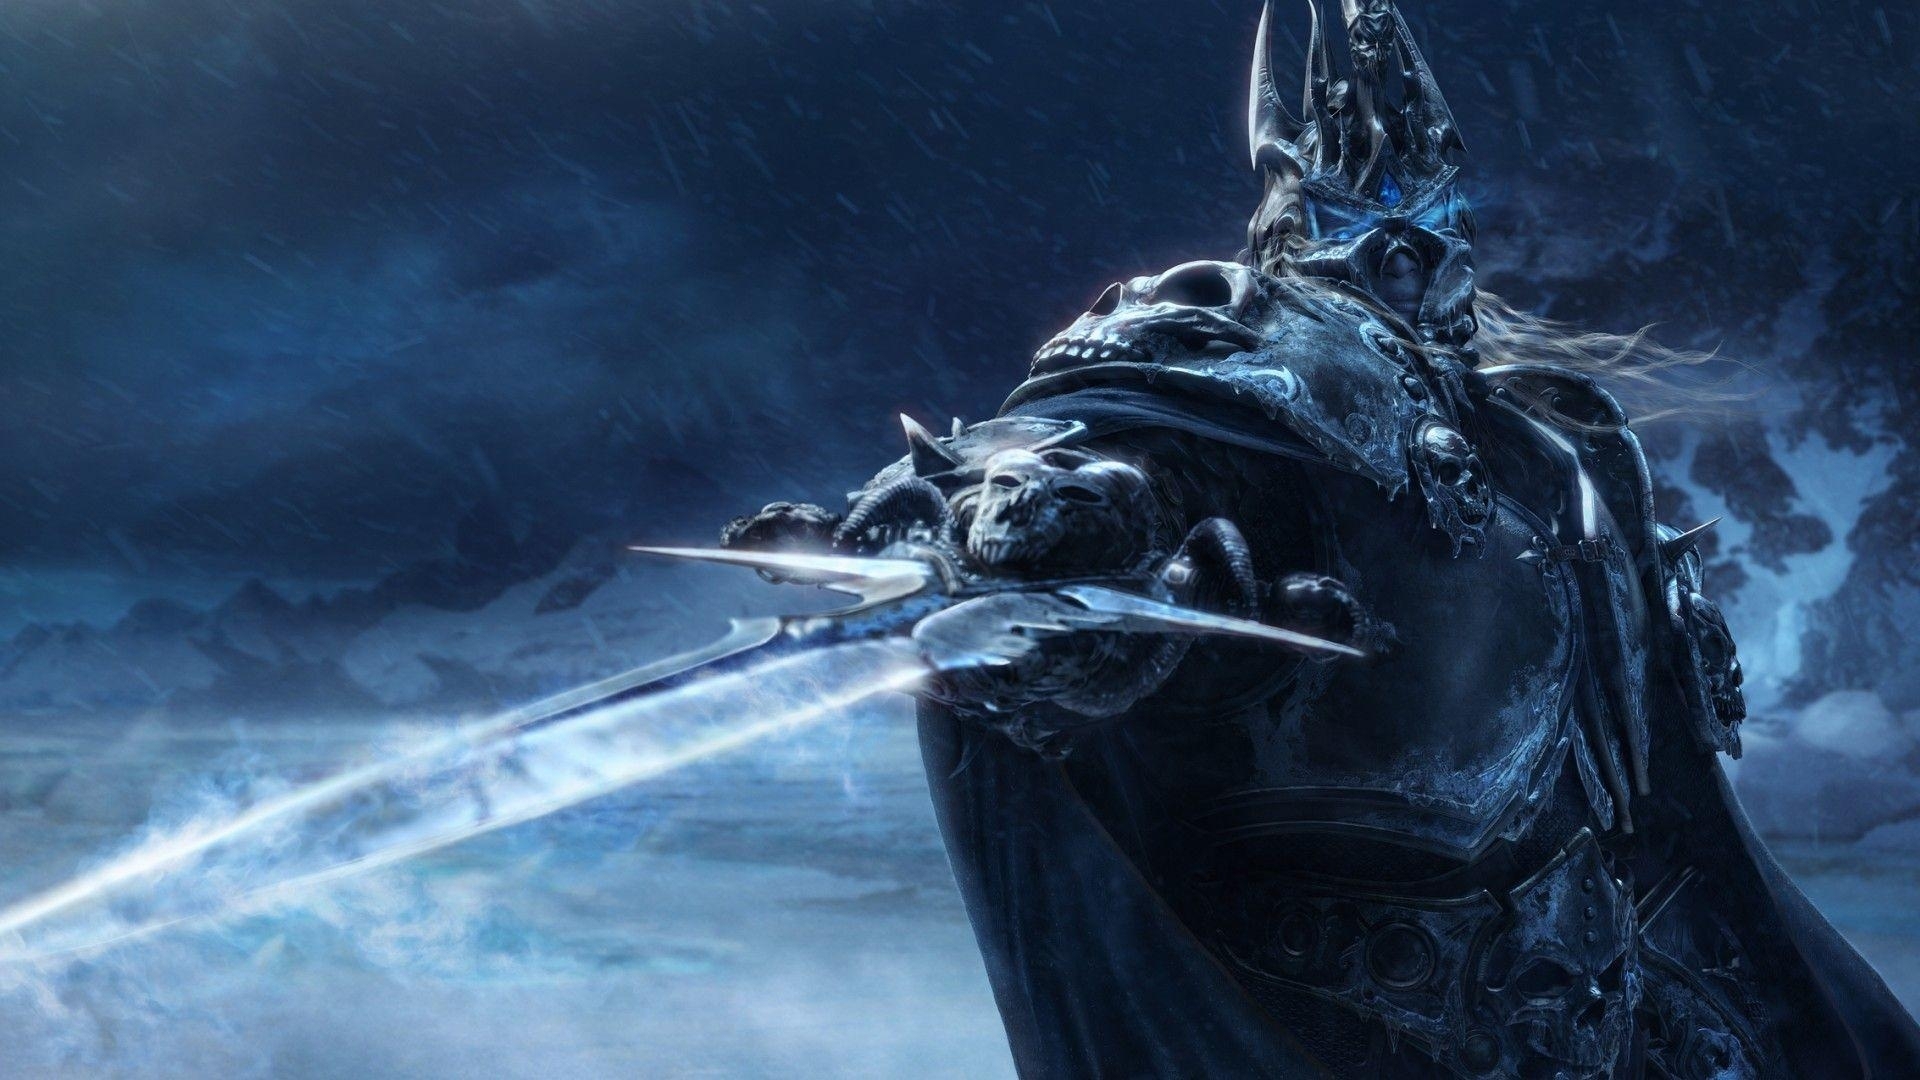 10 Top Wrath Of The Lich King Wallpaper 1920X1080 FULL HD 1920×1080 For PC Desktop